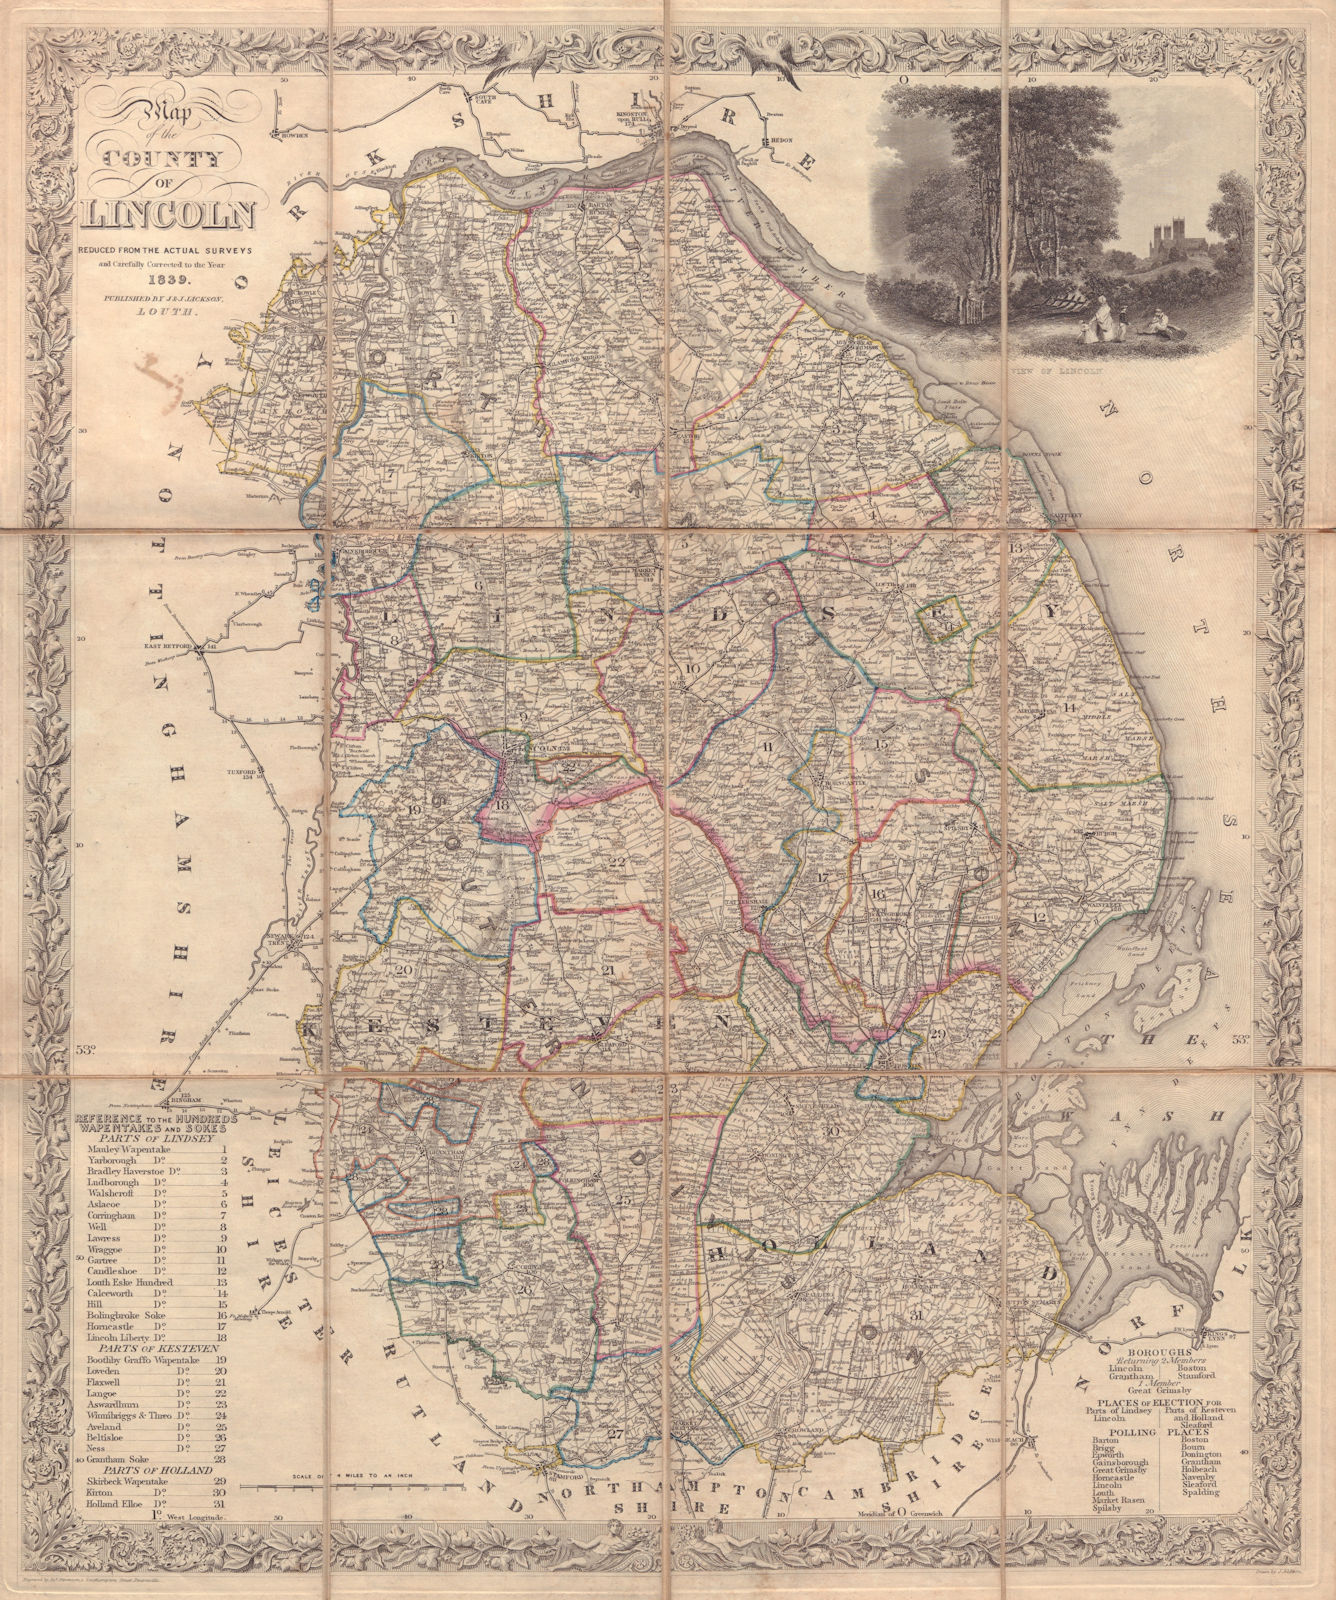 Map of the county of Lincoln. Lincolnshire. 56x47cm. JACKSON 1839 old